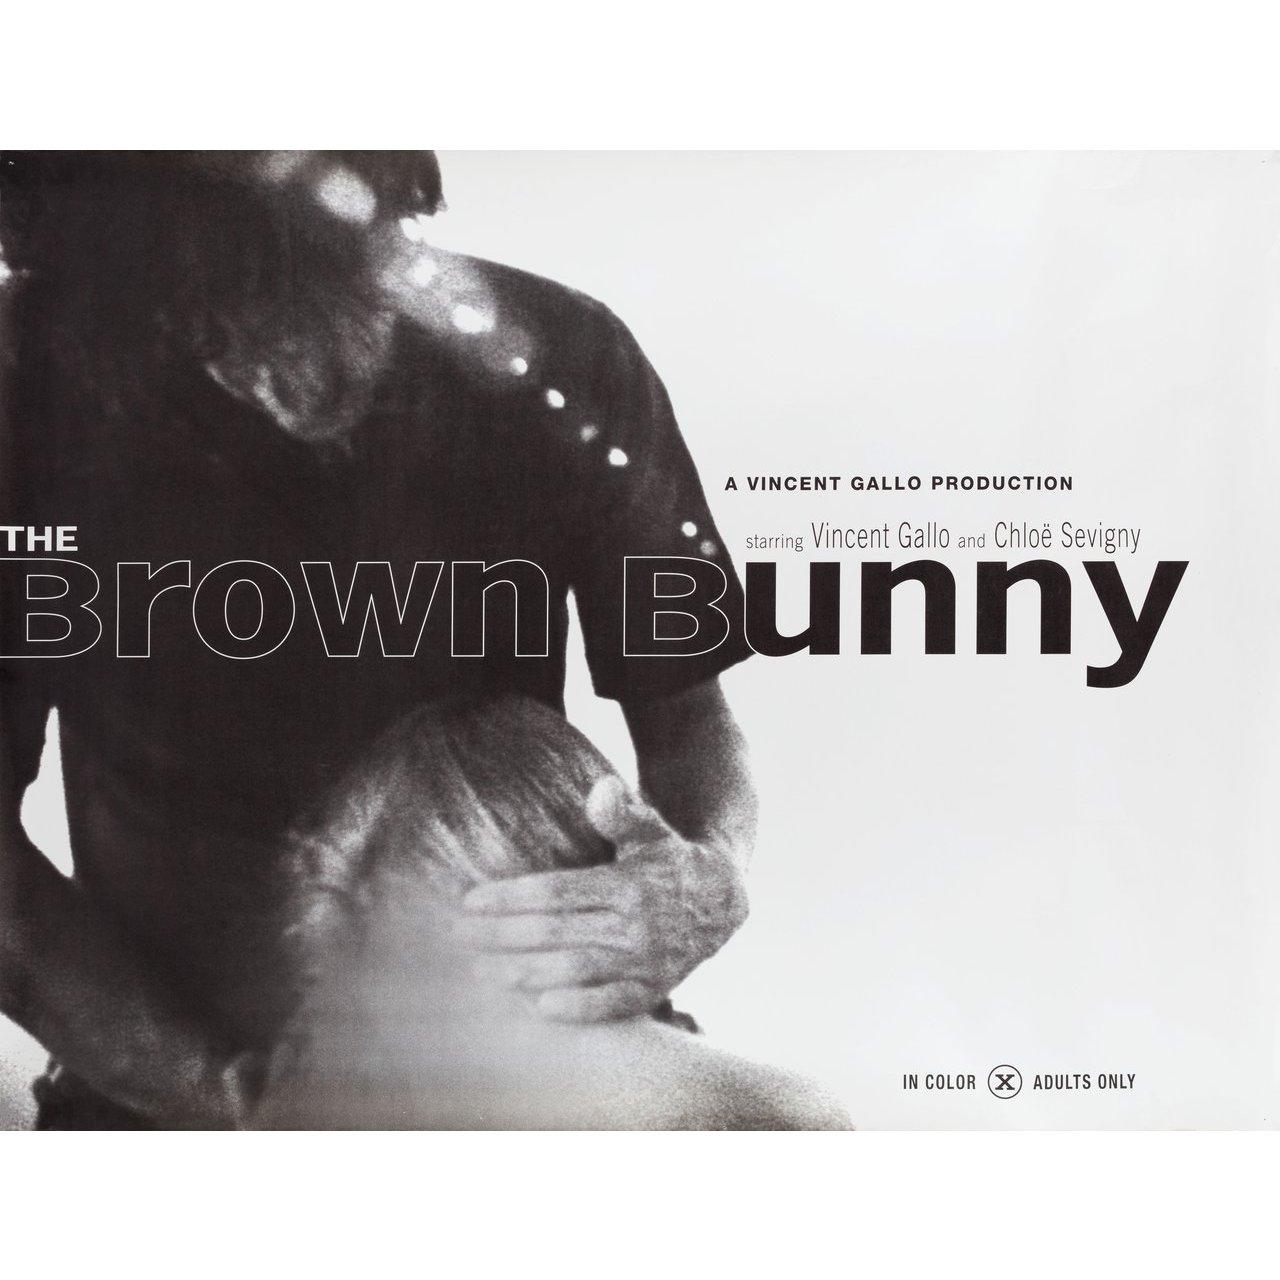 Original 2003 U.S. subway poster by Chris Habib for the film The Brown Bunny directed by Vincent Gallo with Vincent Gallo / Chloe Sevigny / Cheryl Tiegs / Elizabeth Blake. Very Good-Fine condition, folded. Many original posters were issued folded or